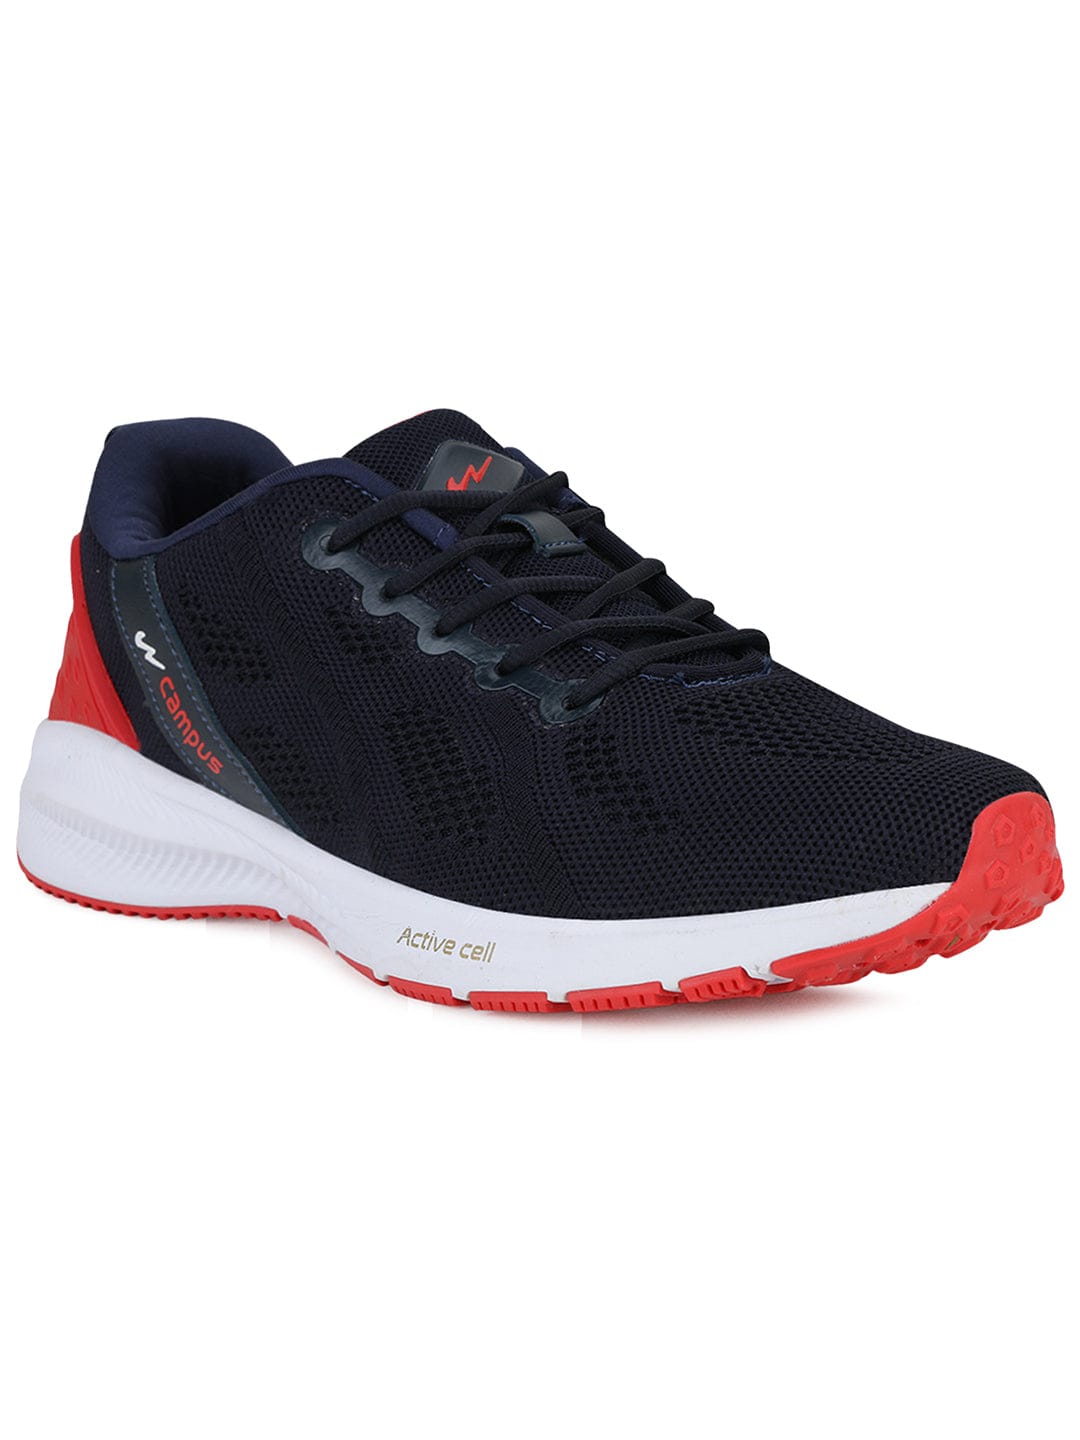 Buy MAXICO Men's Running Shoes online | Campus Shoes